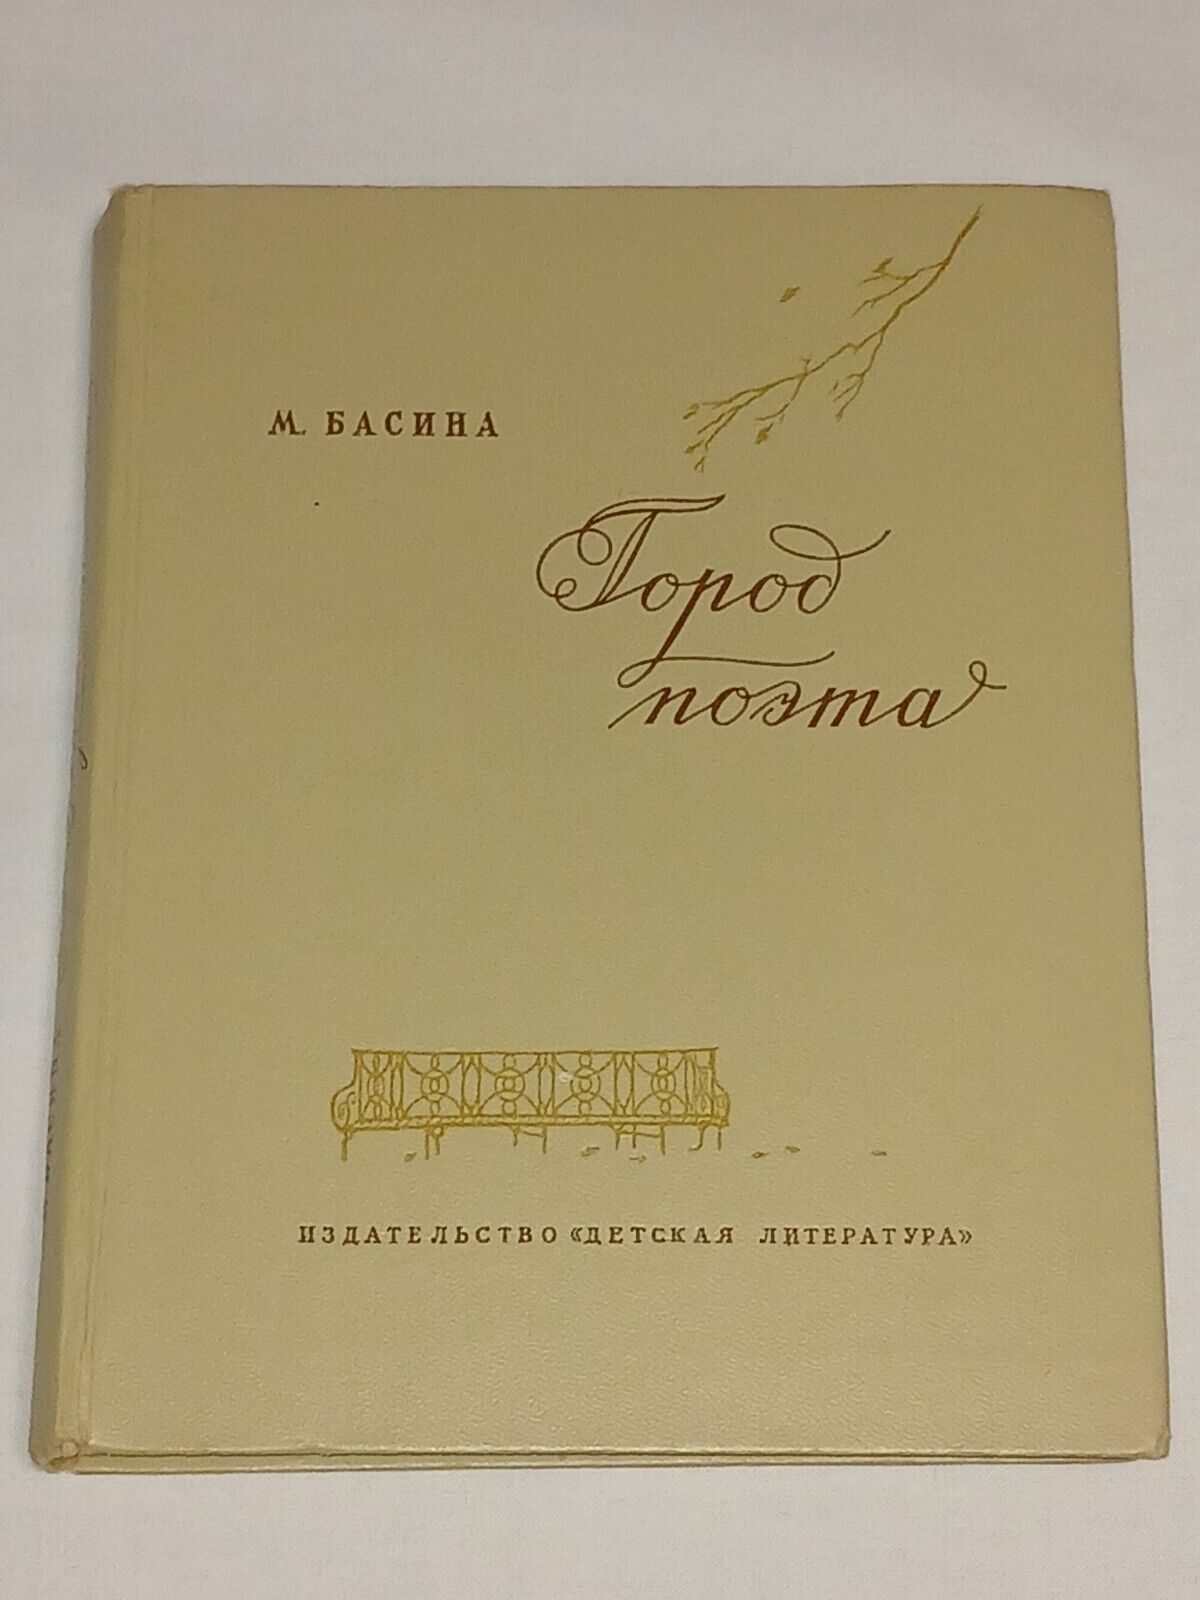 1965 City of the Poet. Vintage Soviet book USSR in Russian